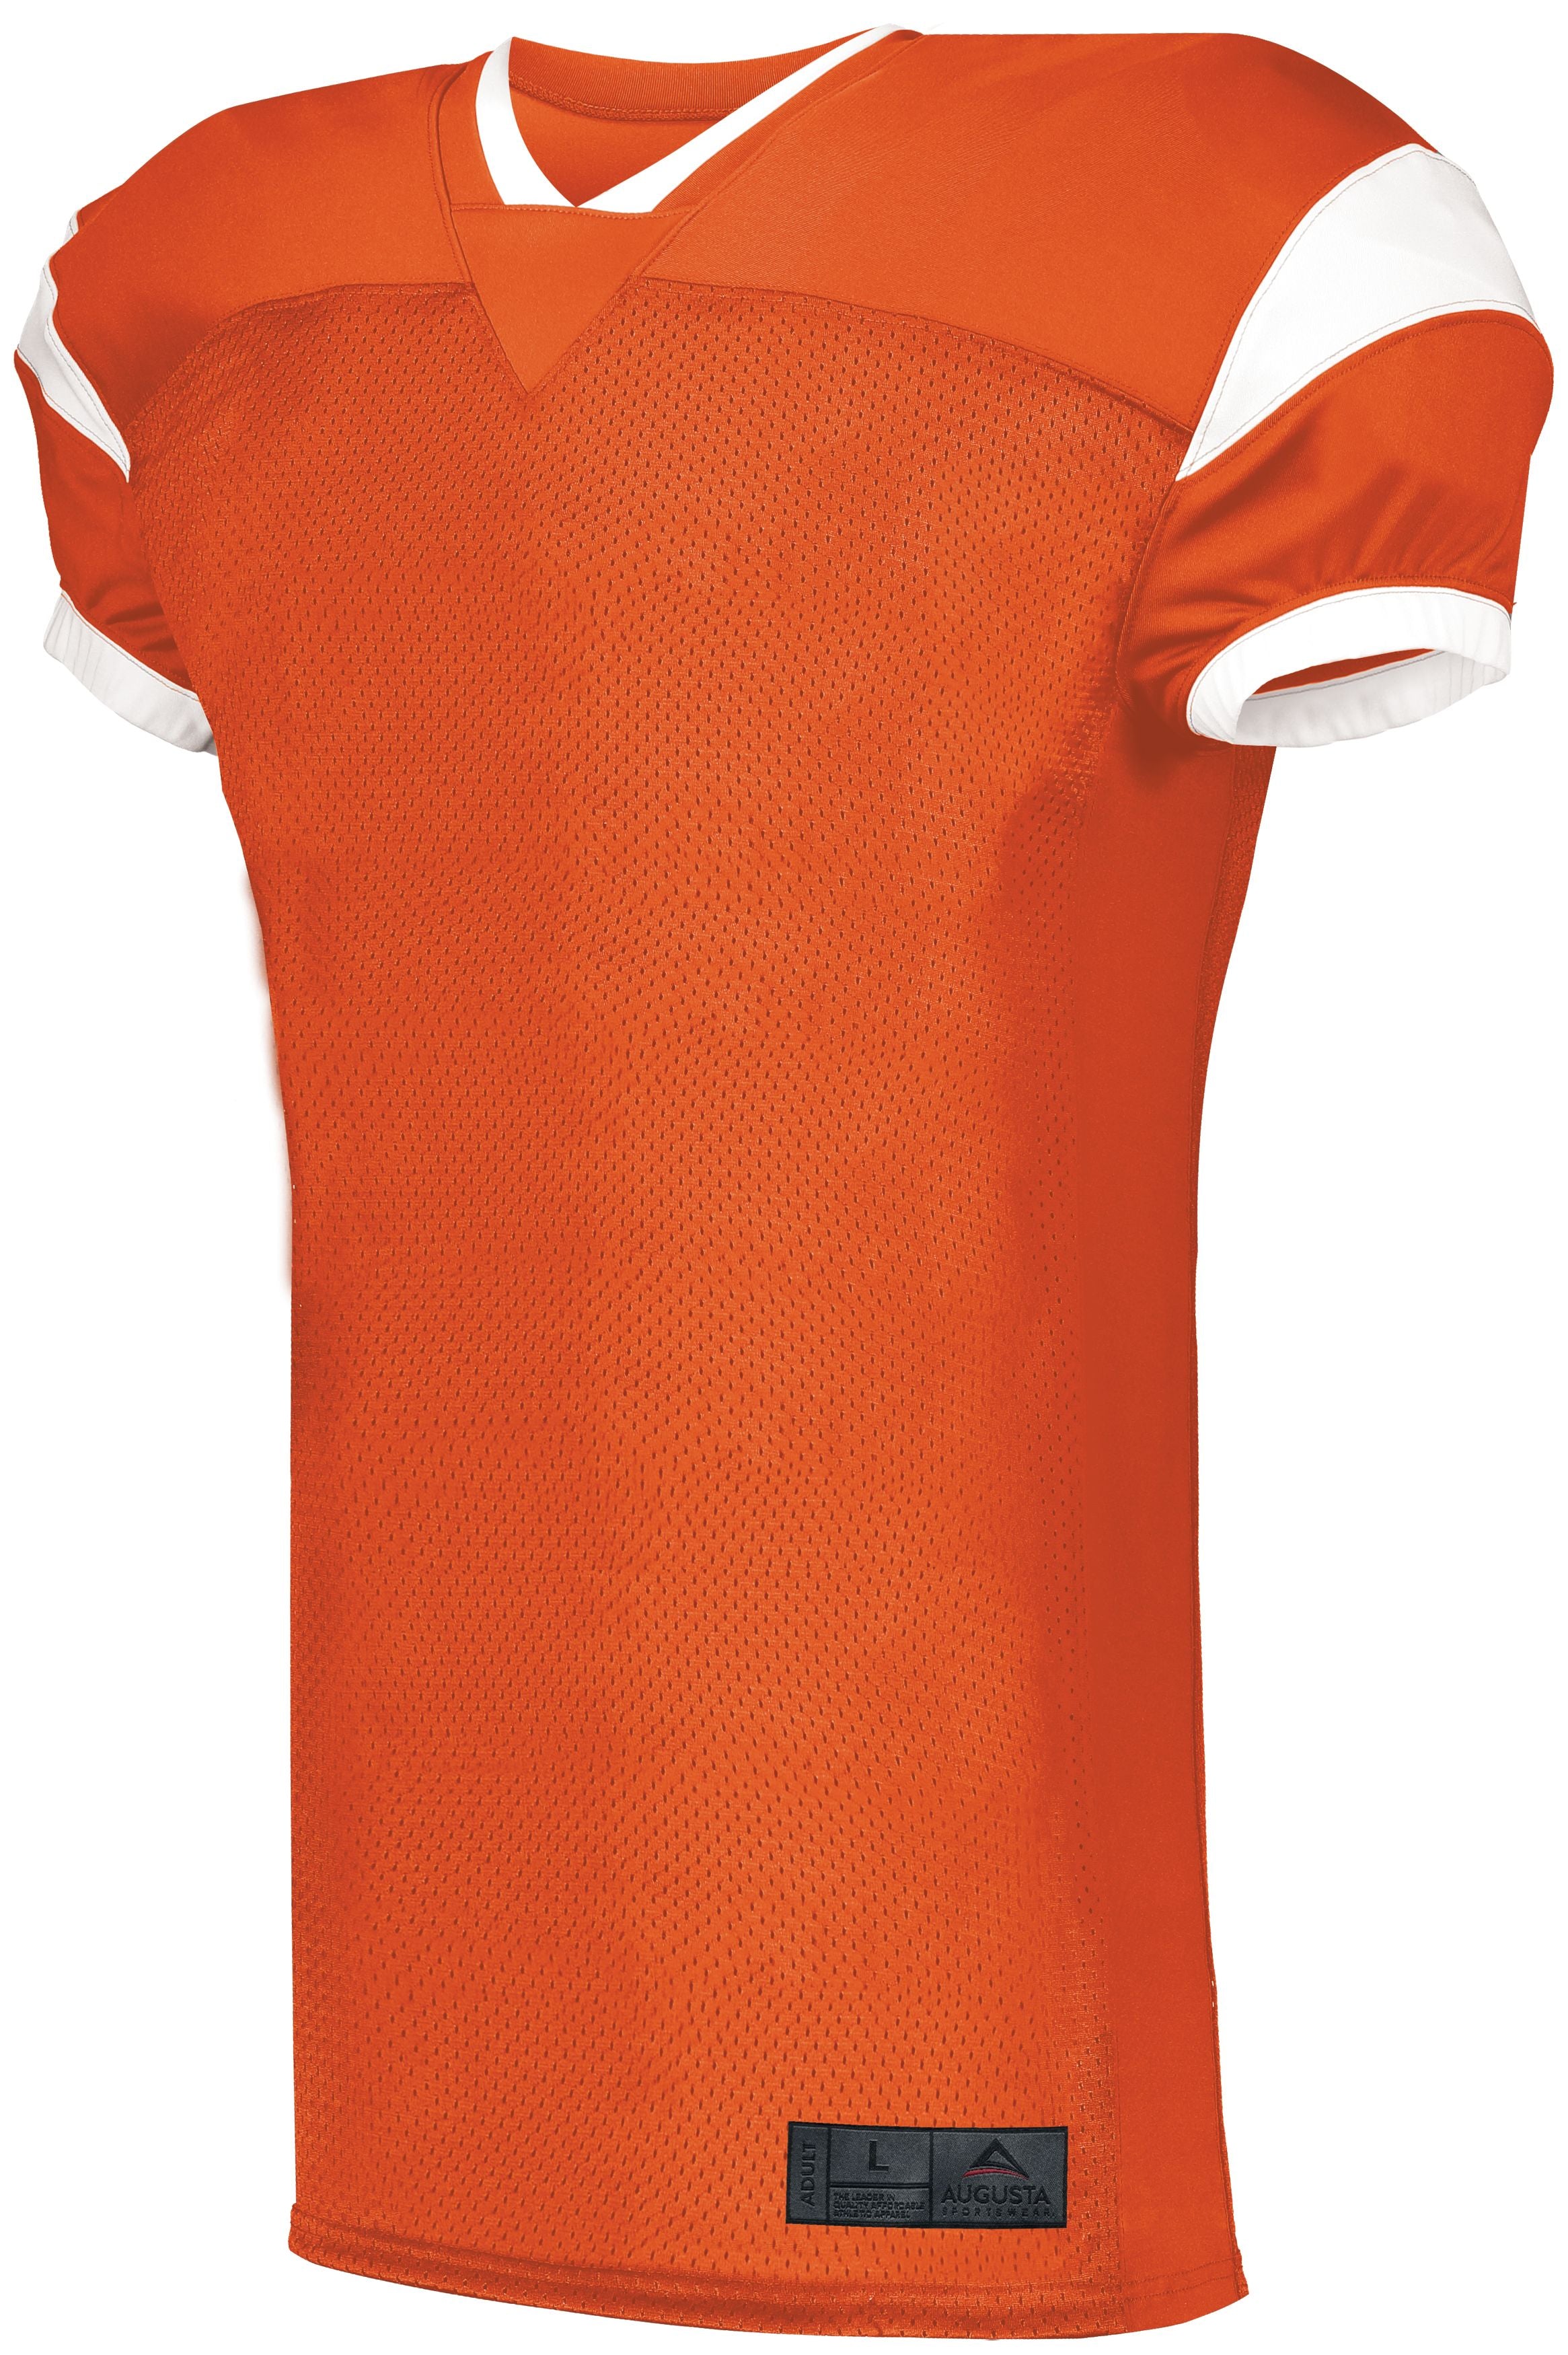 Augusta Sportswear Youth Slant Football Jersey in Orange/White  -Part of the Youth, Youth-Jersey, Augusta-Products, Football, Shirts, All-Sports, All-Sports-1 product lines at KanaleyCreations.com